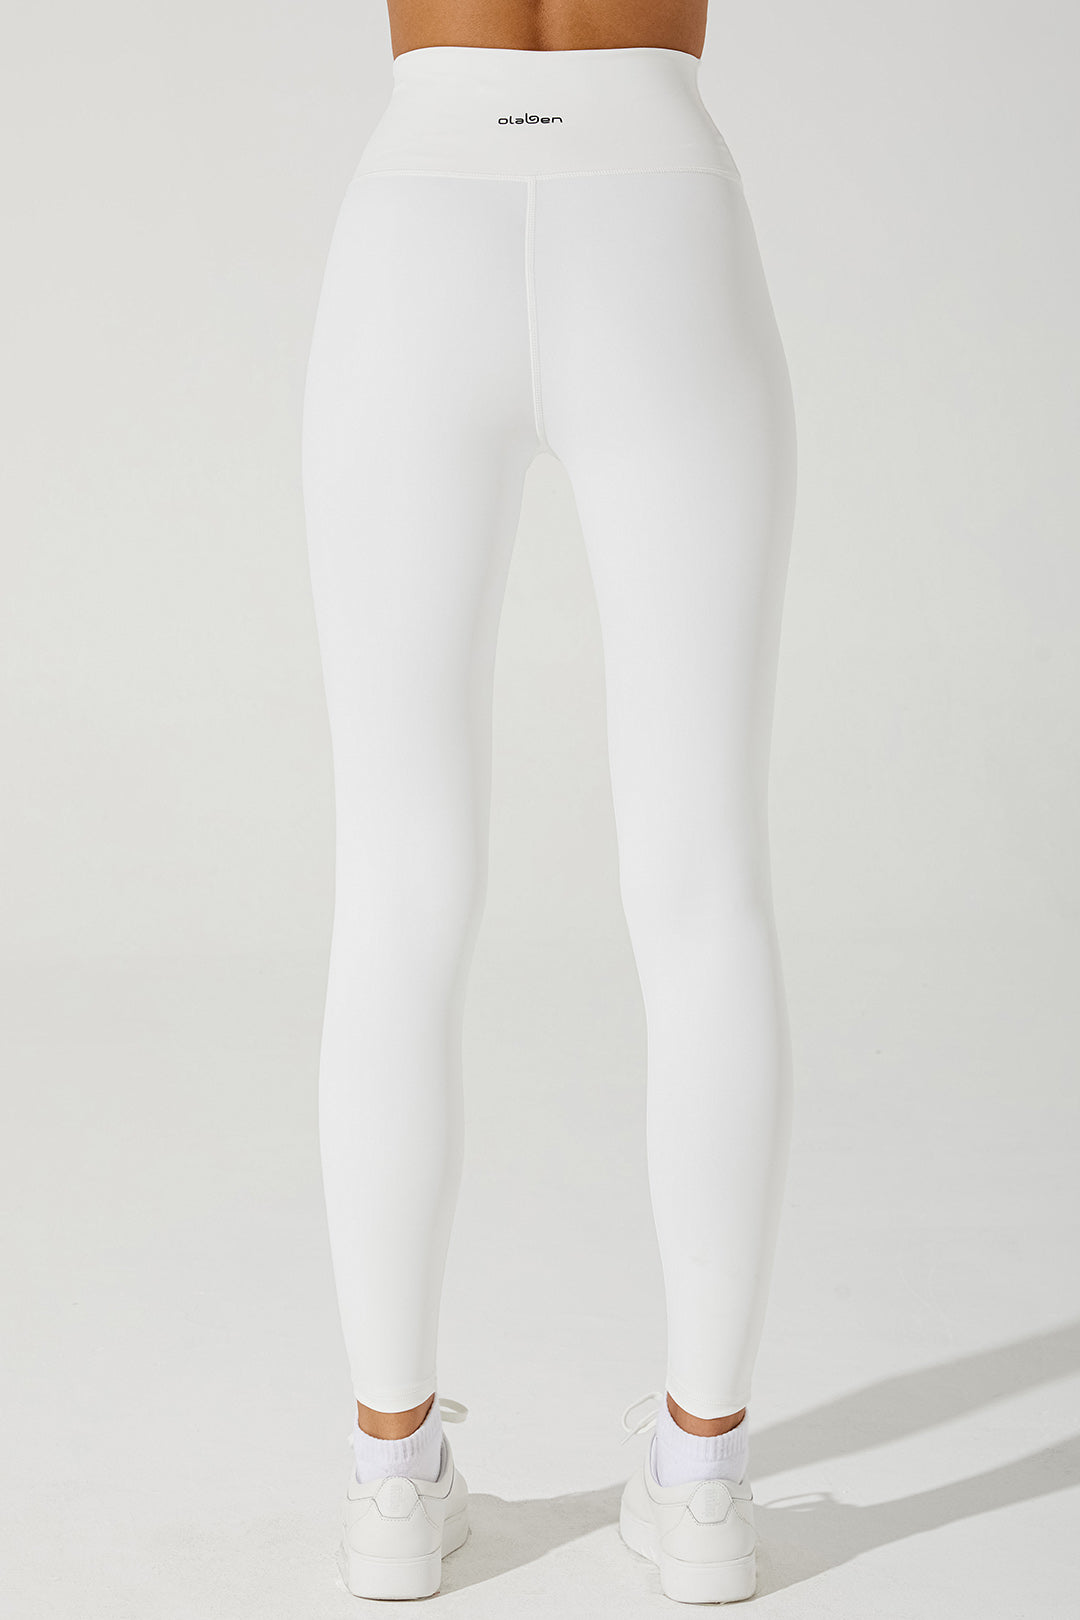 White women's leggings with a stylish design, perfect for any casual or athletic outfit.